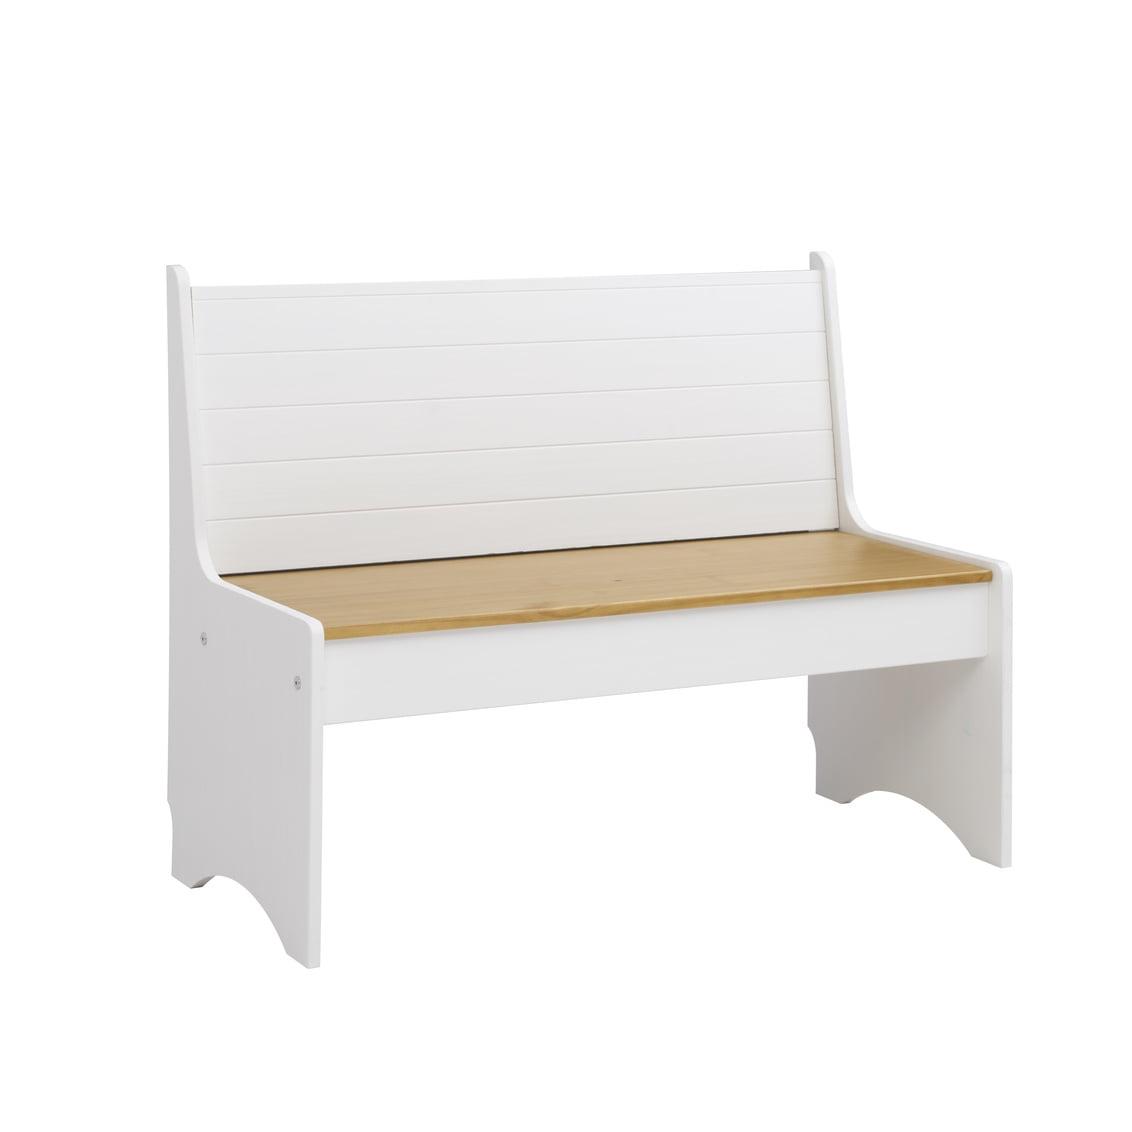 Pine Wood White and Natural Large Storage Bench